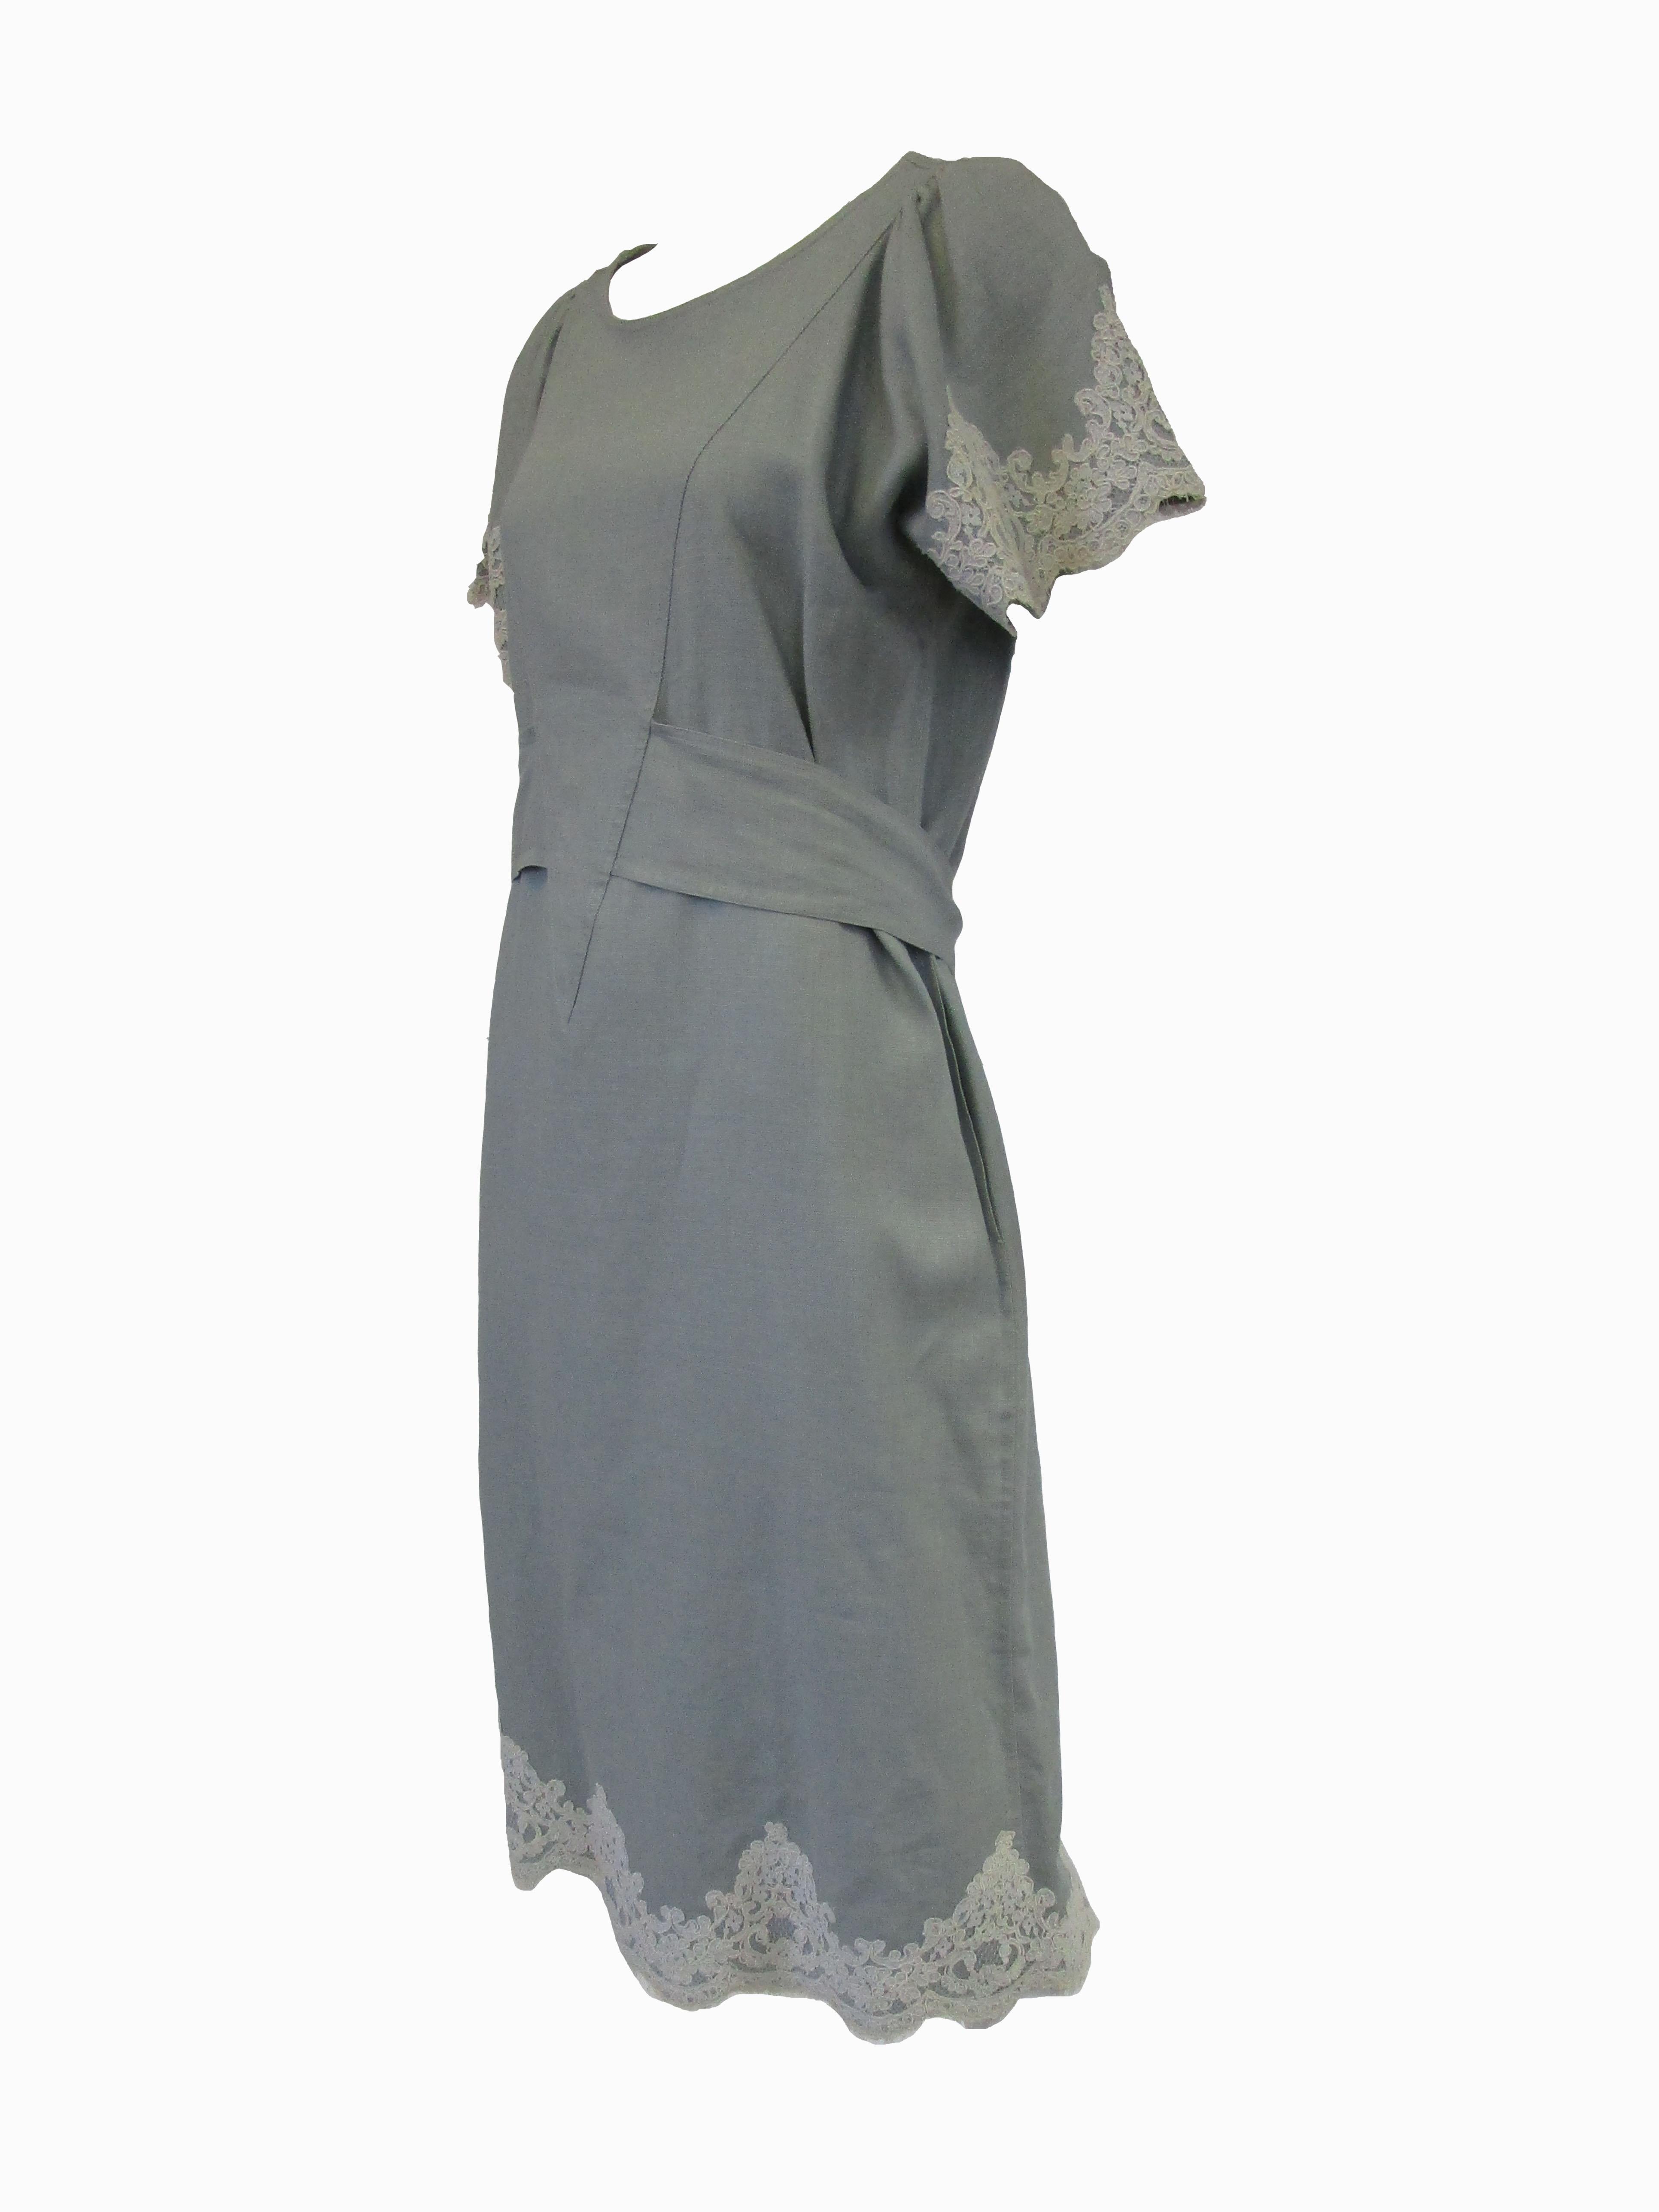 1980s Geoffrey Beene Slate Blue Linen & Lace Dress In Excellent Condition For Sale In Houston, TX